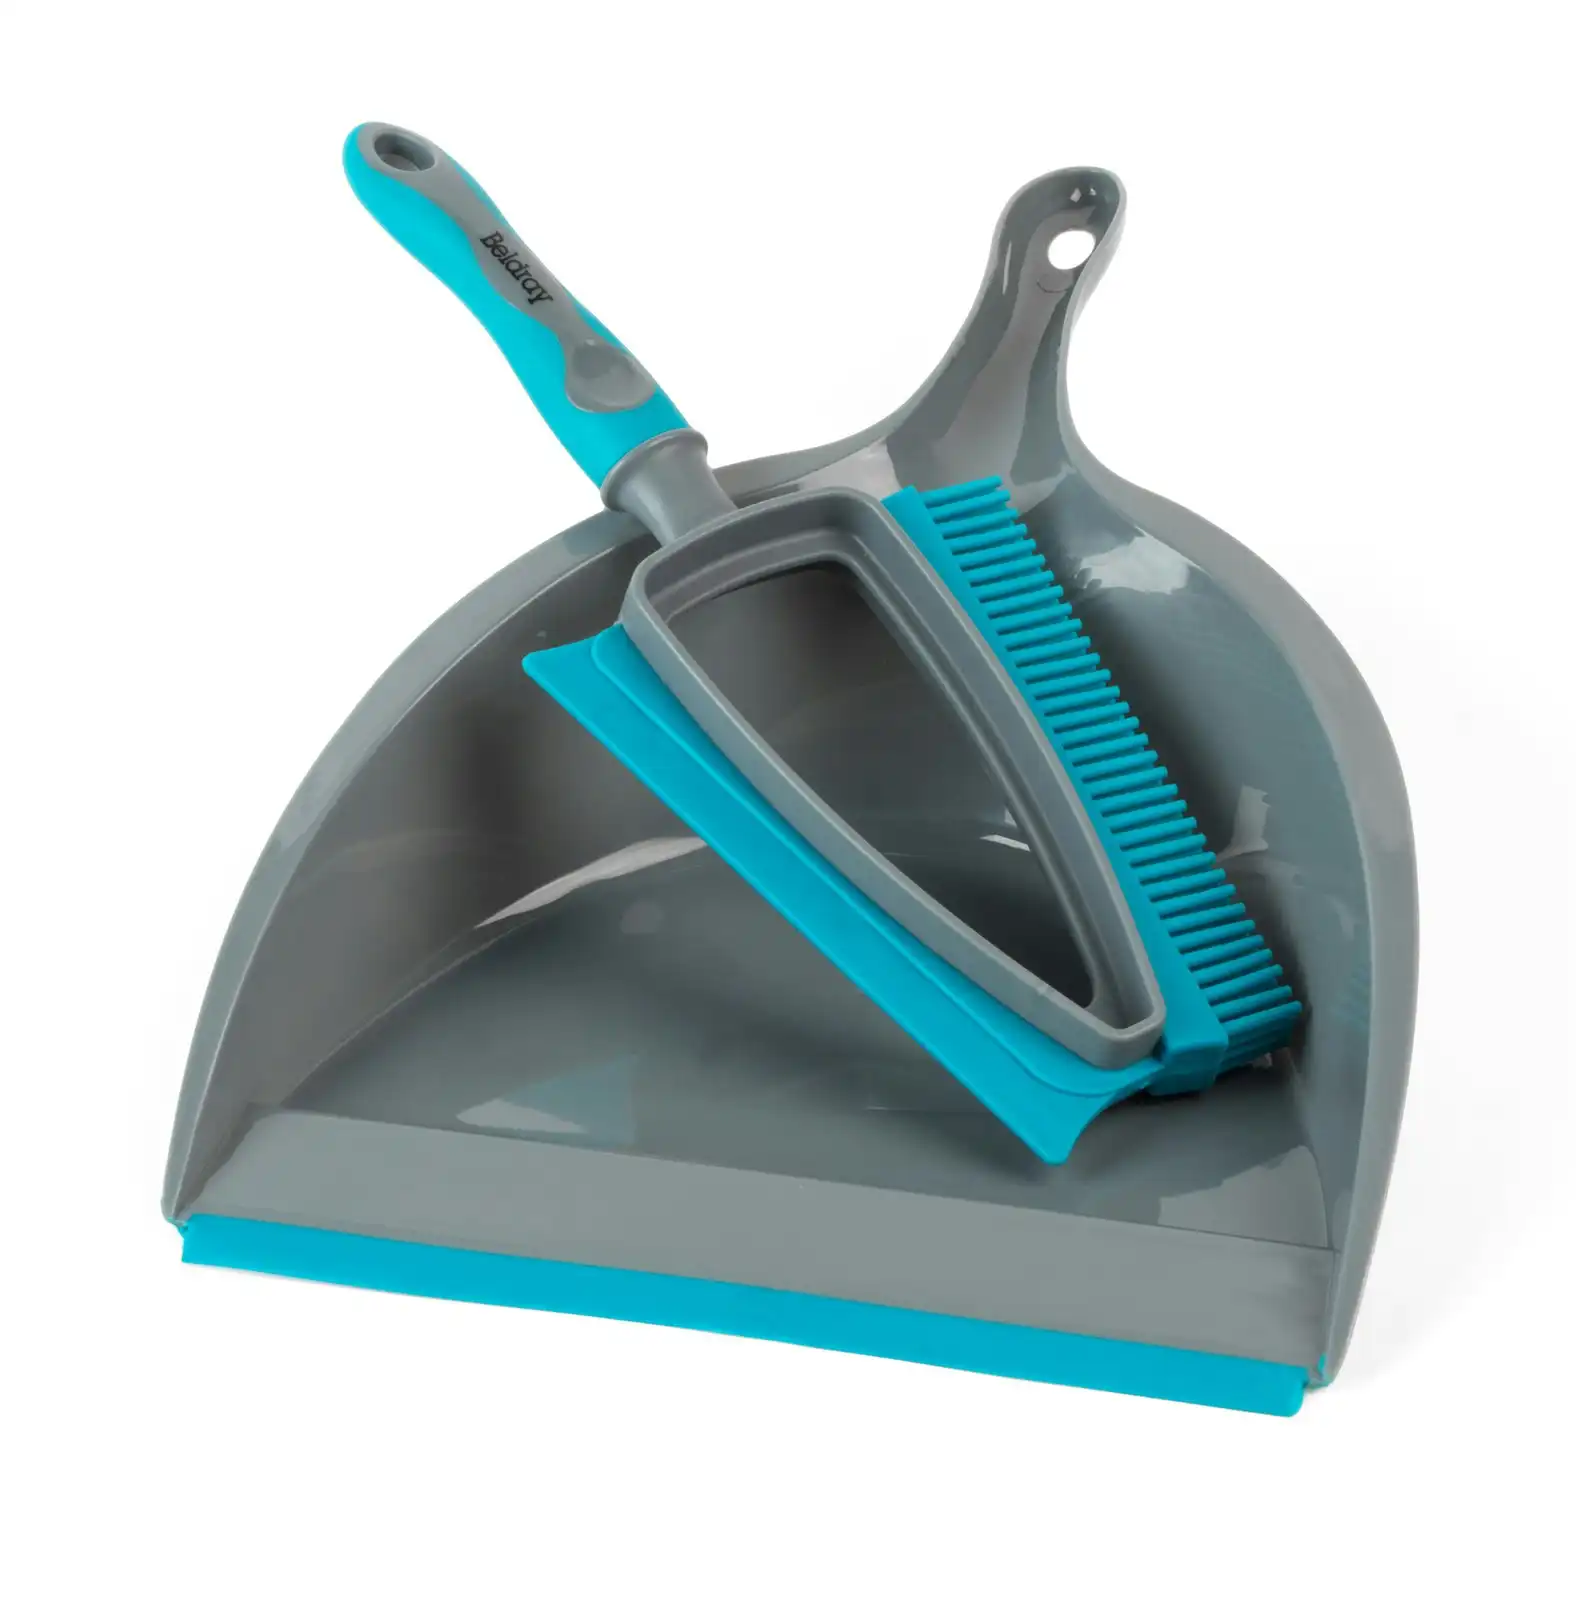 Beldray Pet Plus 2 In 1 Lift/Trap Dual Rubber Head Dustpan & Brush Home Cleaning